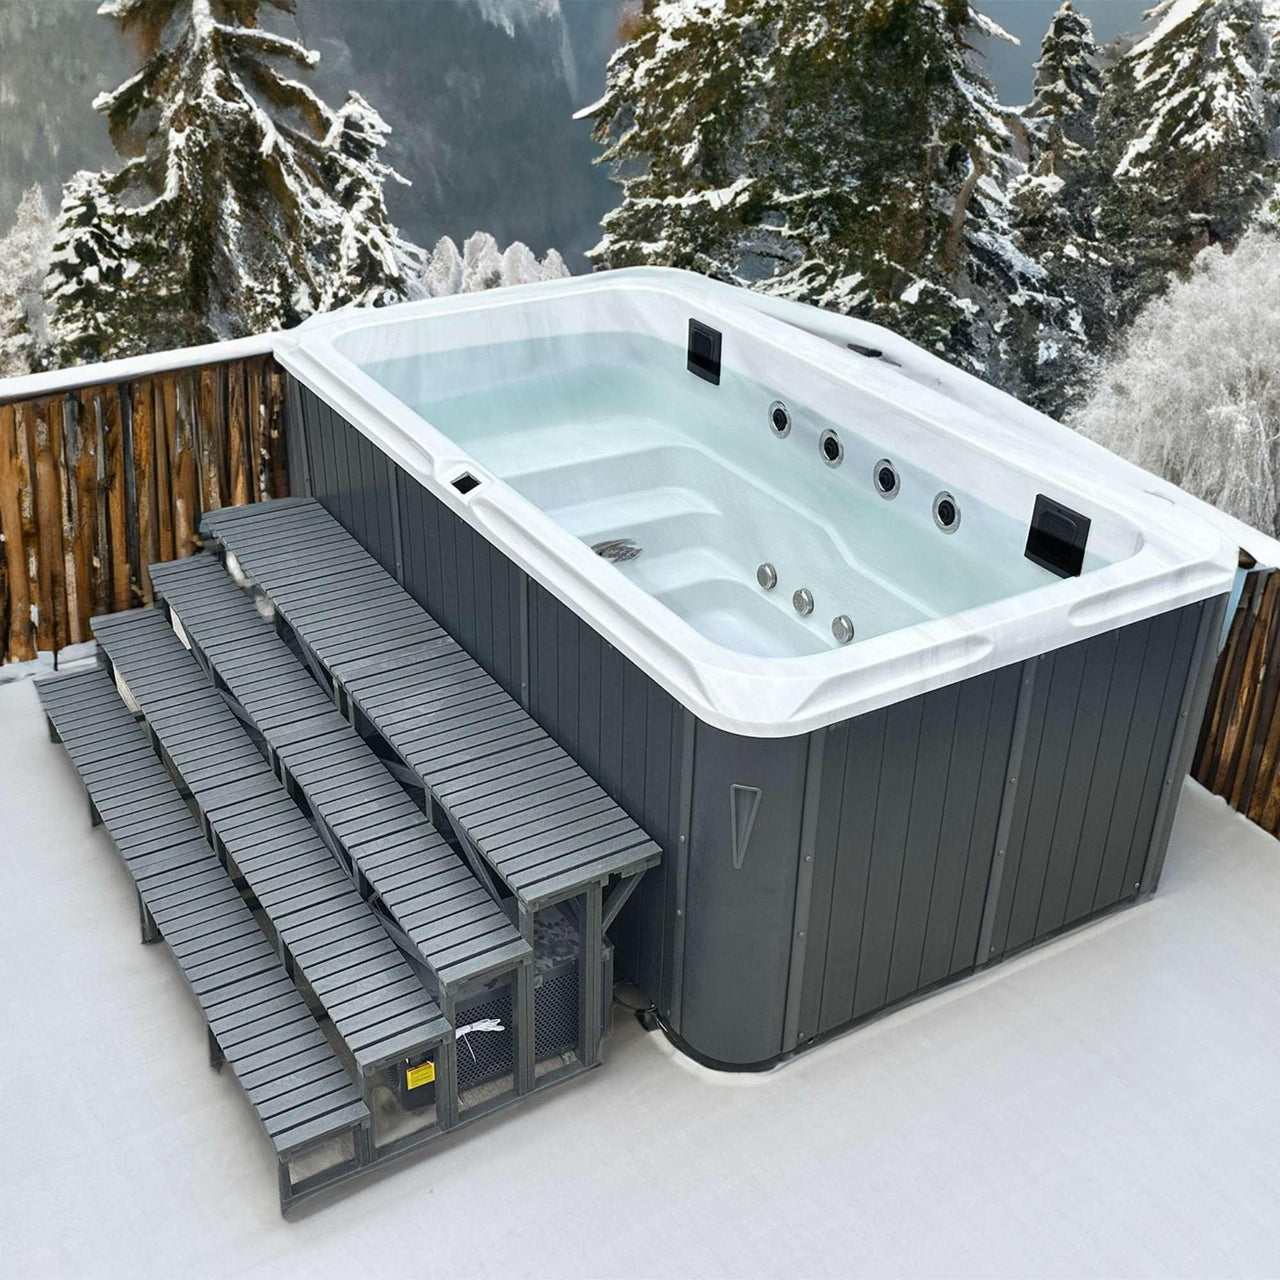 Introducing The Plunge All-In: Redefining Aesthetics and Cooling Technology  For Cold Water Therapy